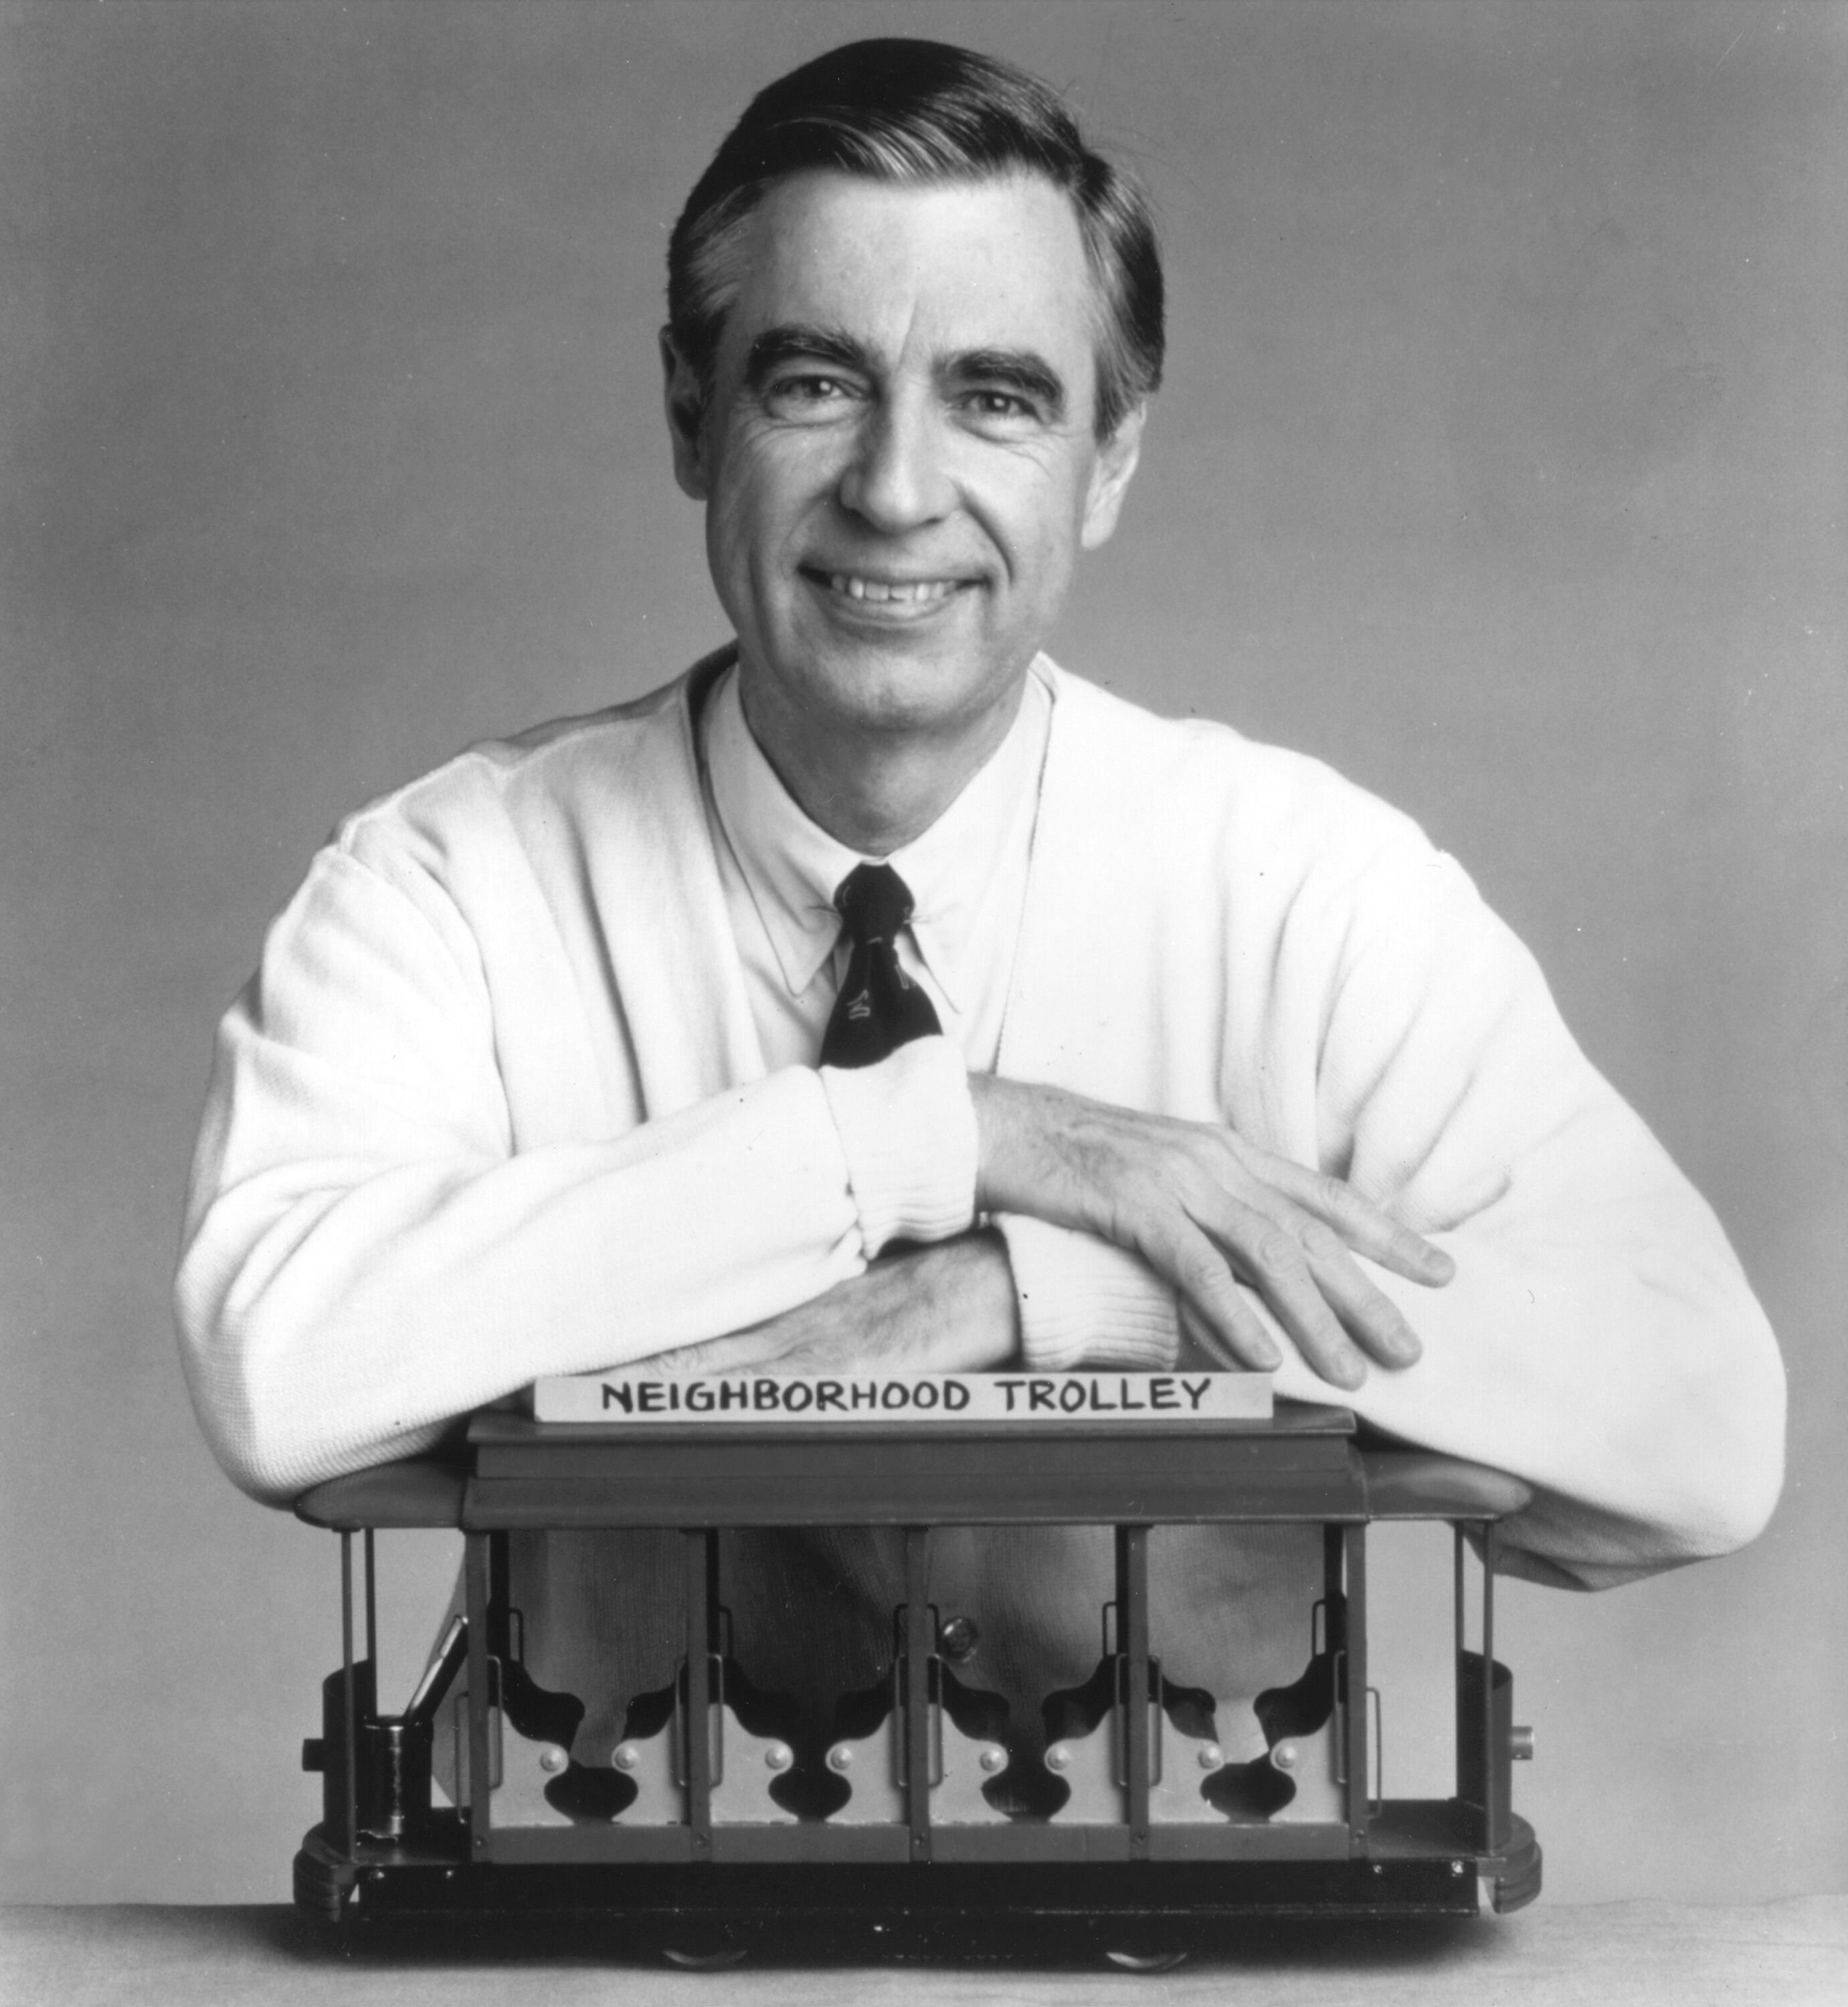 Fred Rogers during his promotional portrait from the 1980s. | Source: Family Communications Inc./Getty Images